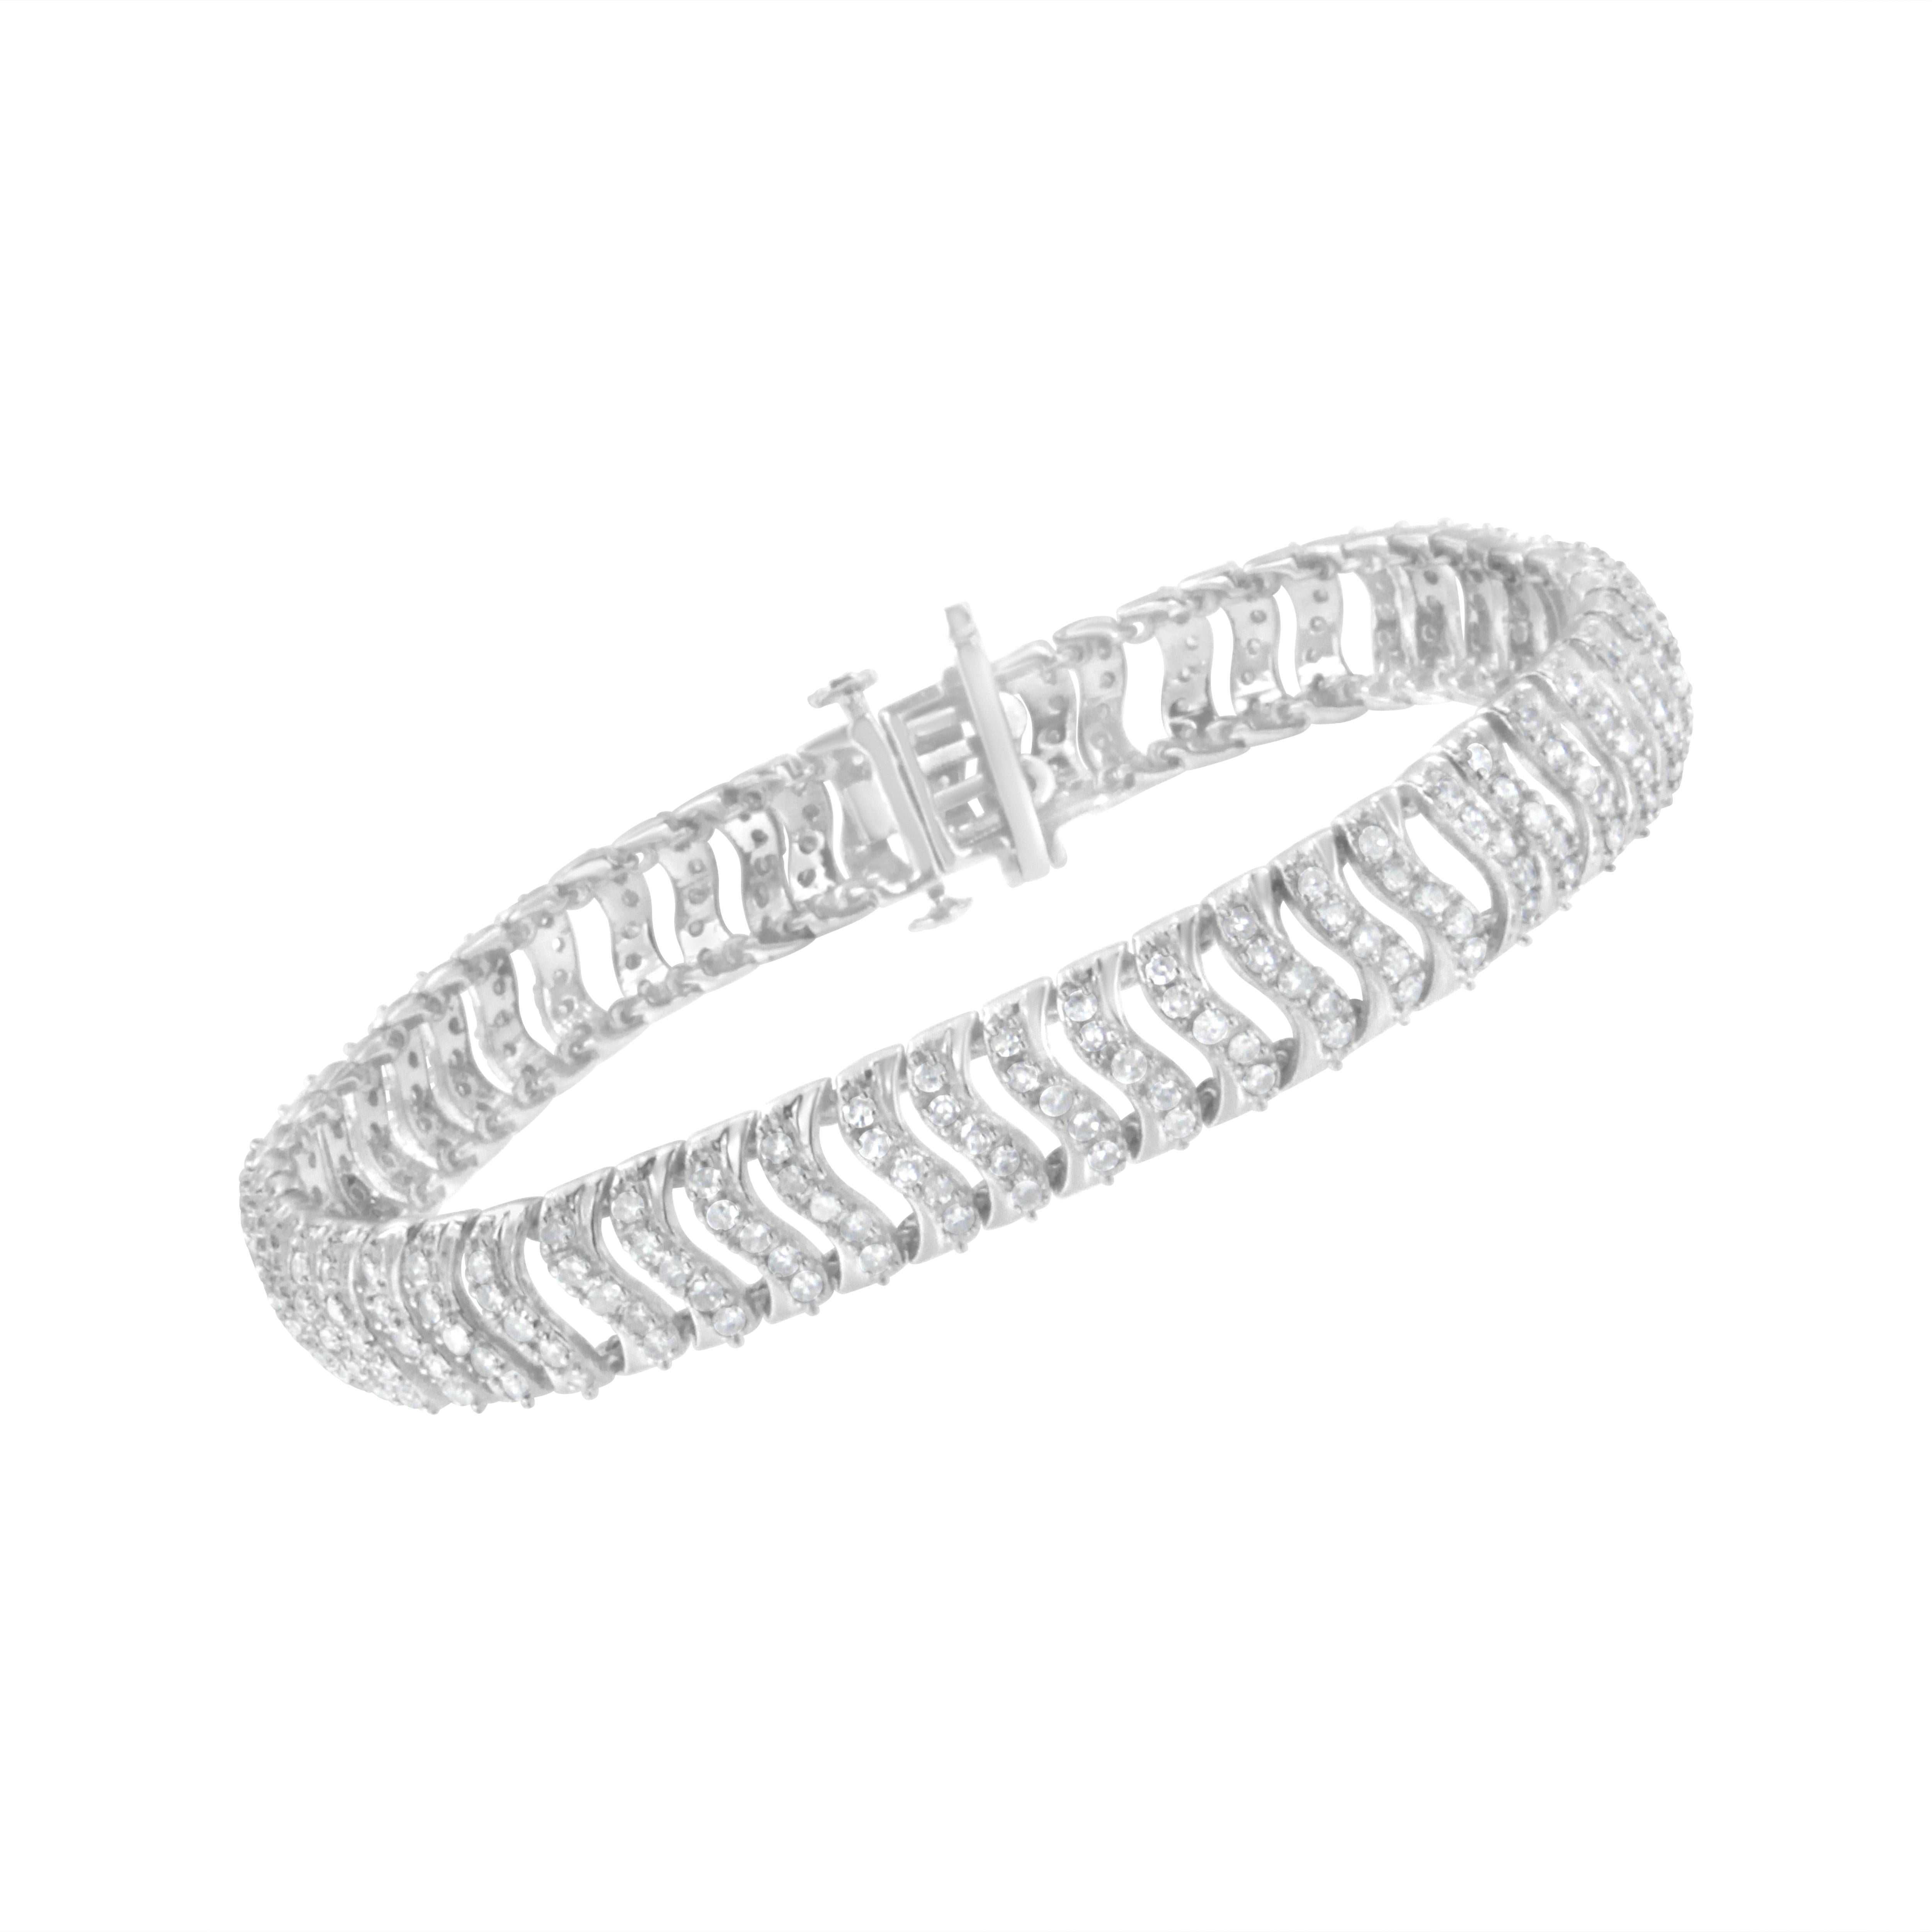 Treat yourself to this glamorous 3 carat diamond wave bracelet. This authentic design is crafted of real 92.5% sterling silver that has been electro-coated with genuine rhodium (a platinum-family metal), a precious metal that will keep a